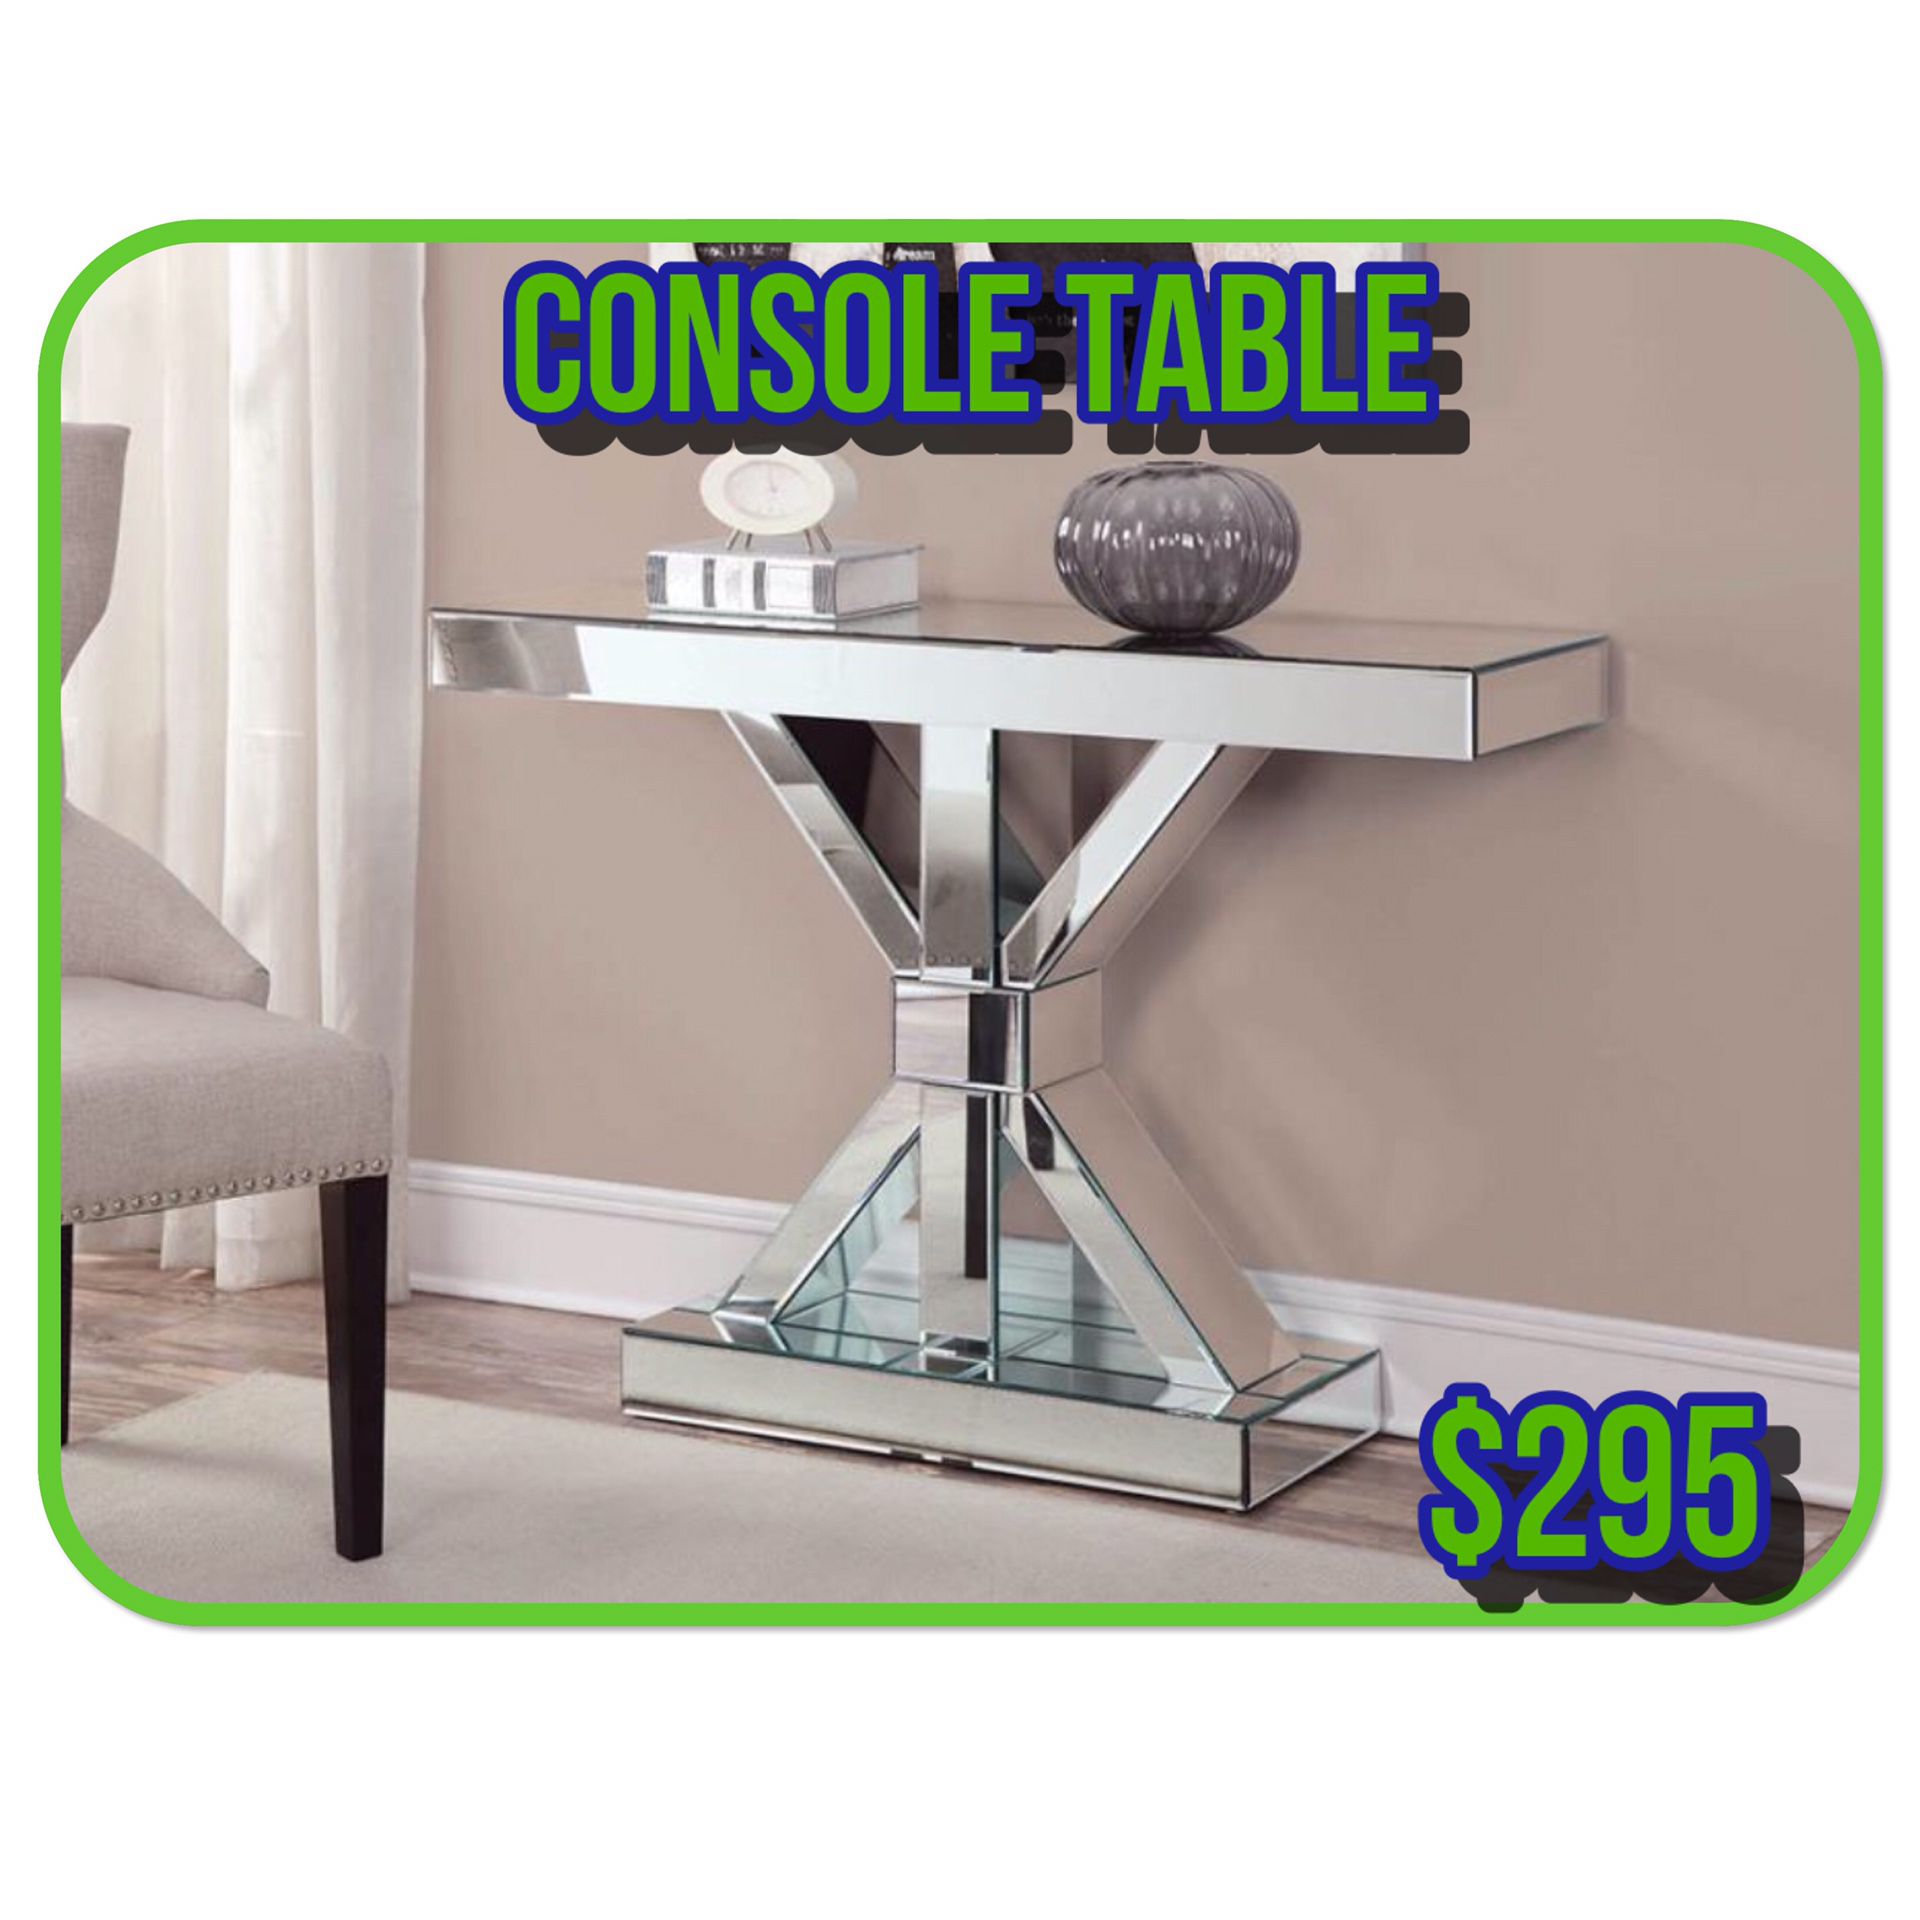 Beautiful Console Table in Offert (930009)